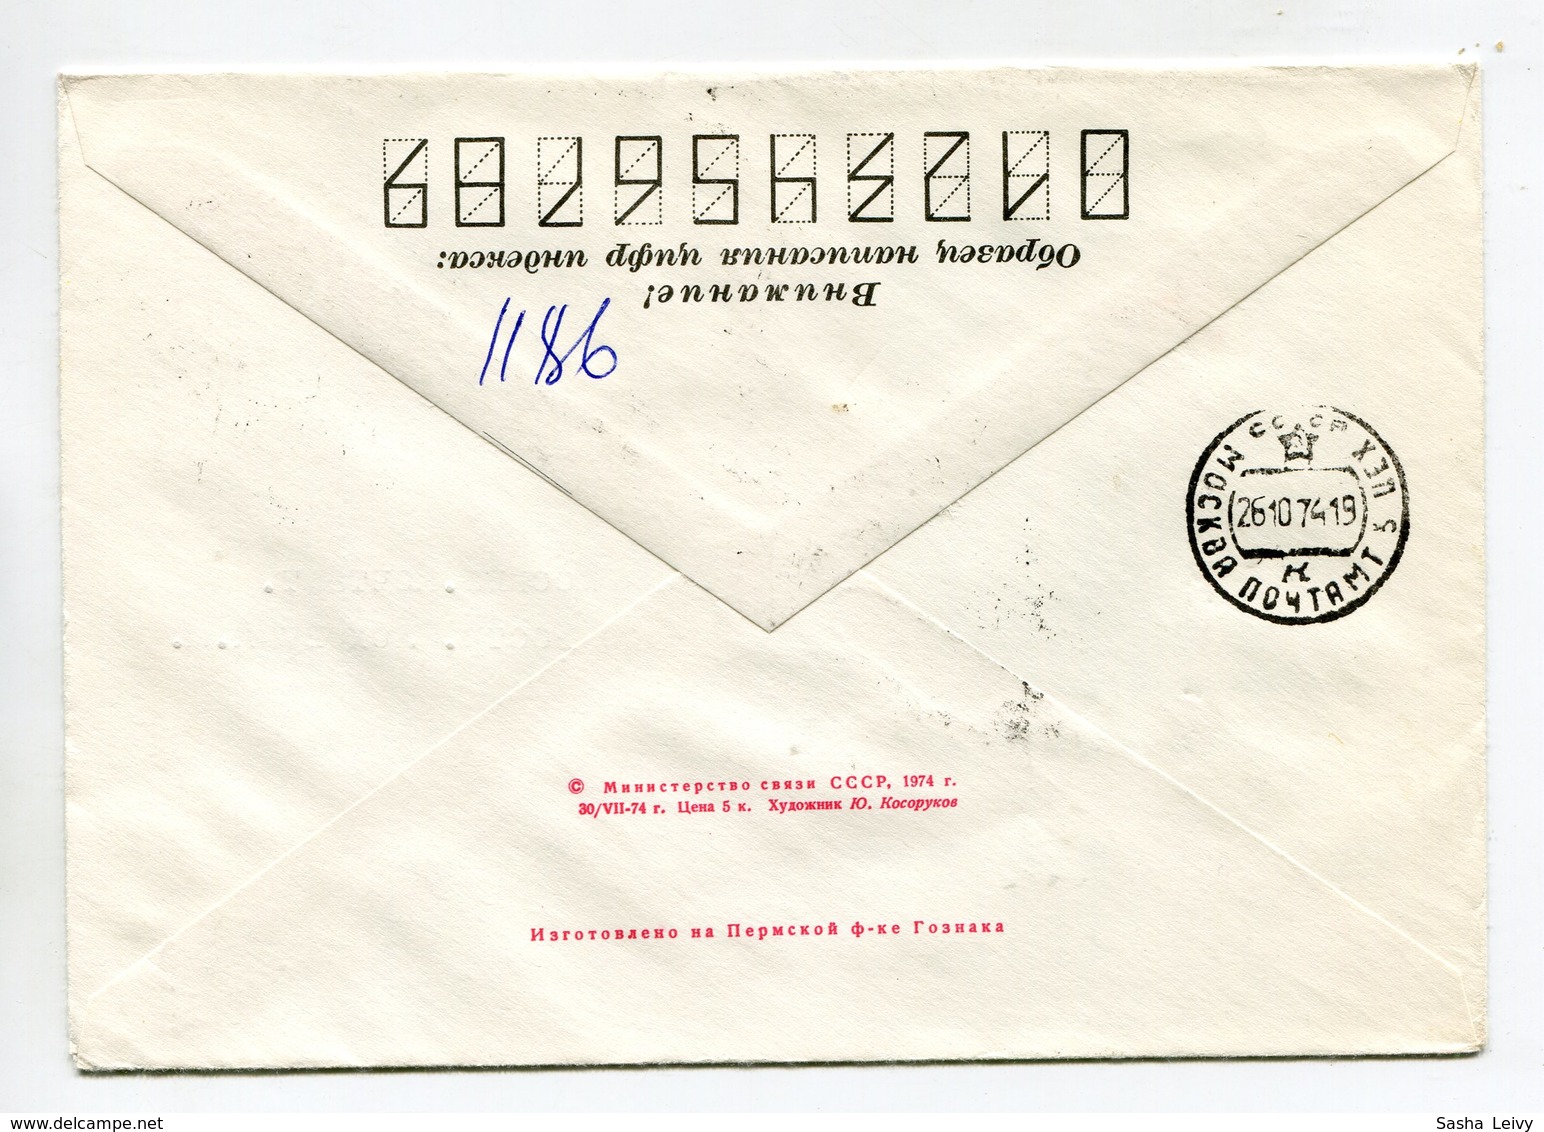 REGISTERED COVER USSR 1974 50th ANNIVERSARY OF THE TAJIKISTAN SSR #74-509 SP.POSTMARK DUSHANBE - 1970-79